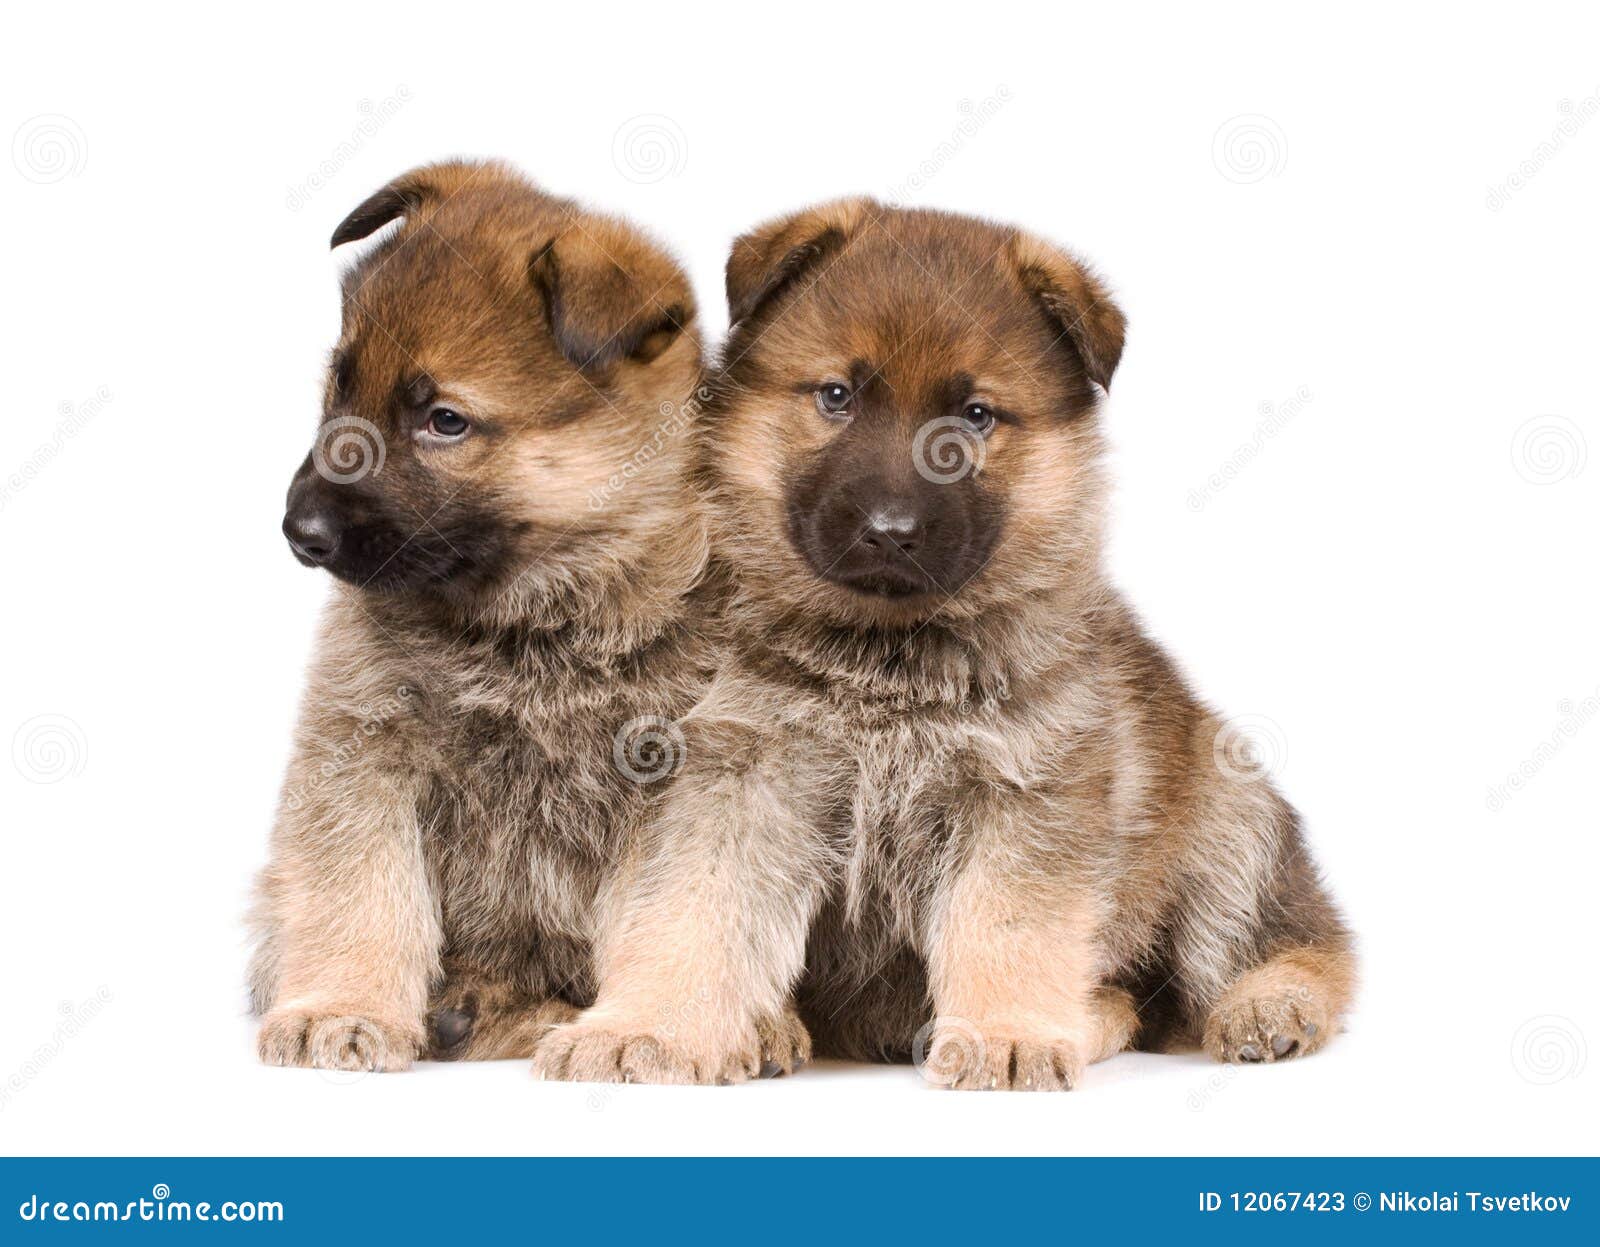 Sheepdogs Puppys Isolated Over White Background Stock Image - Image of ...